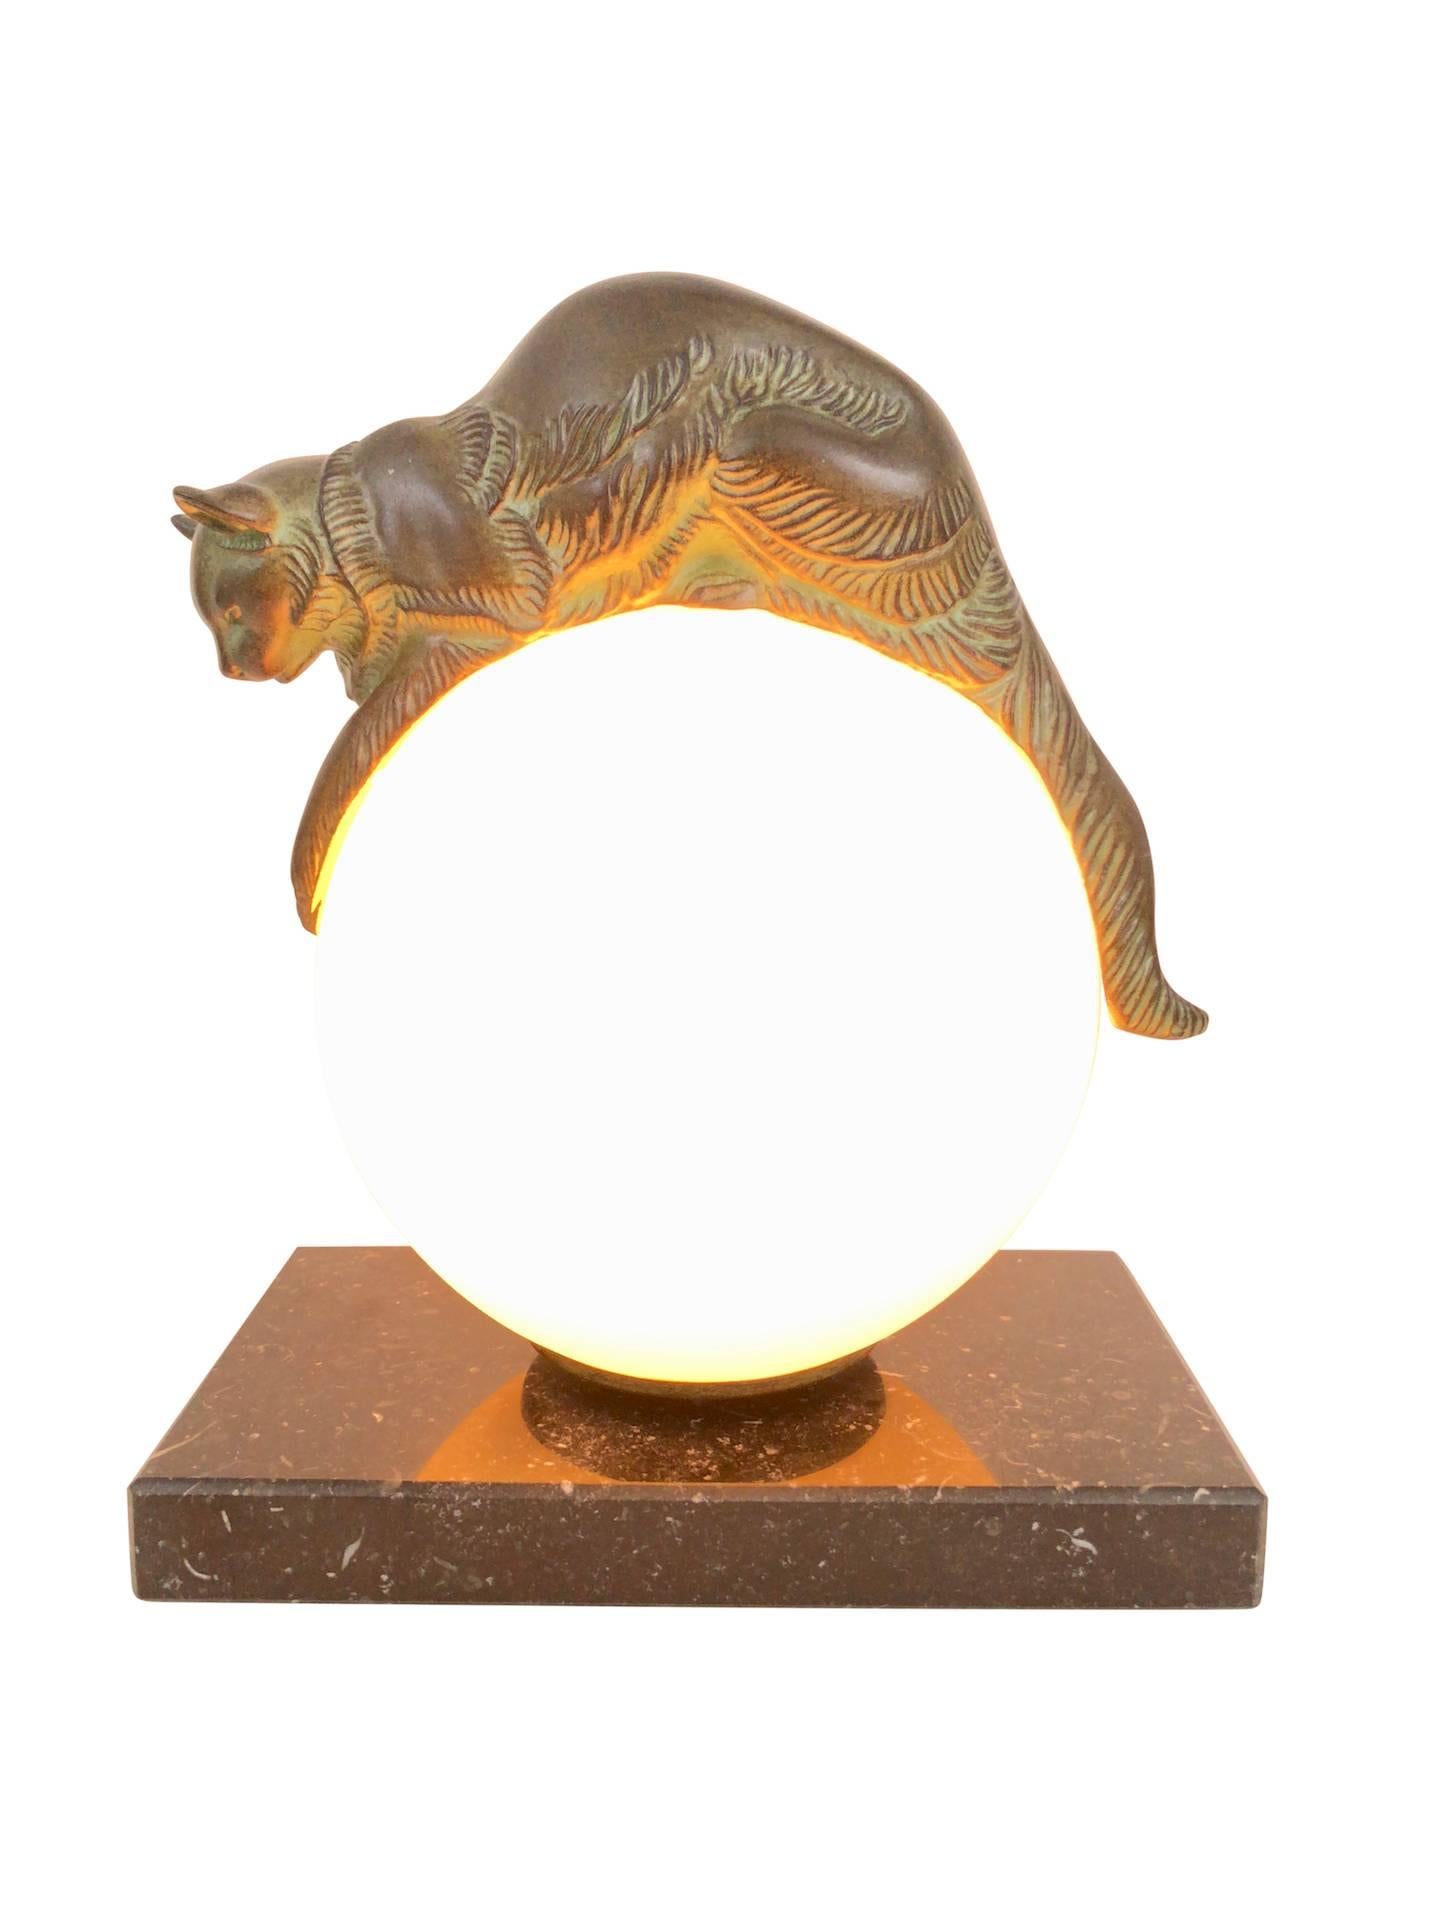 French Table Lamp Equilibre a Cat on a Glass Ball by Gaillard for Max Le Verrier 1